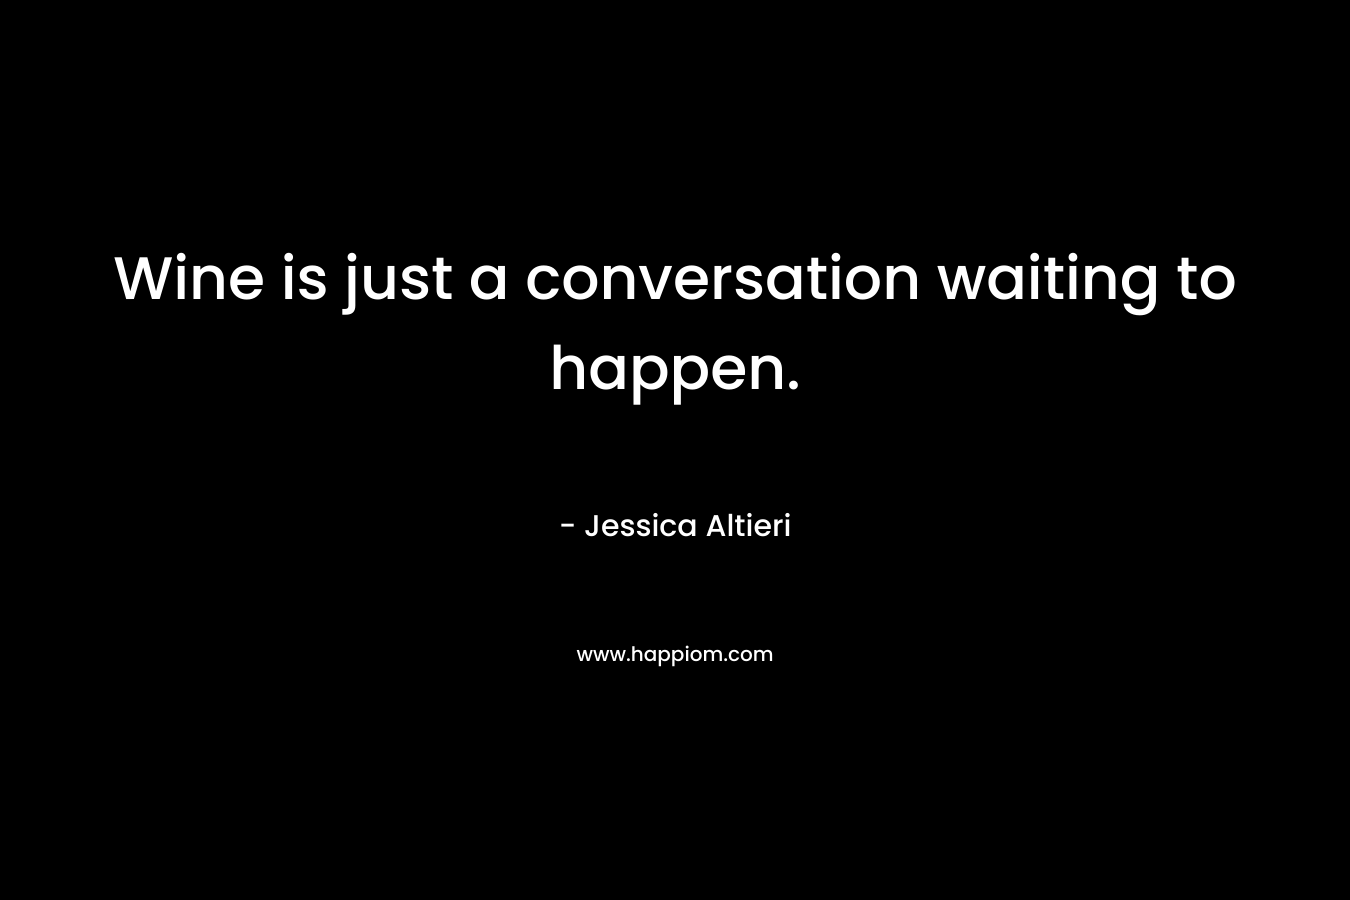 Wine is just a conversation waiting to happen.